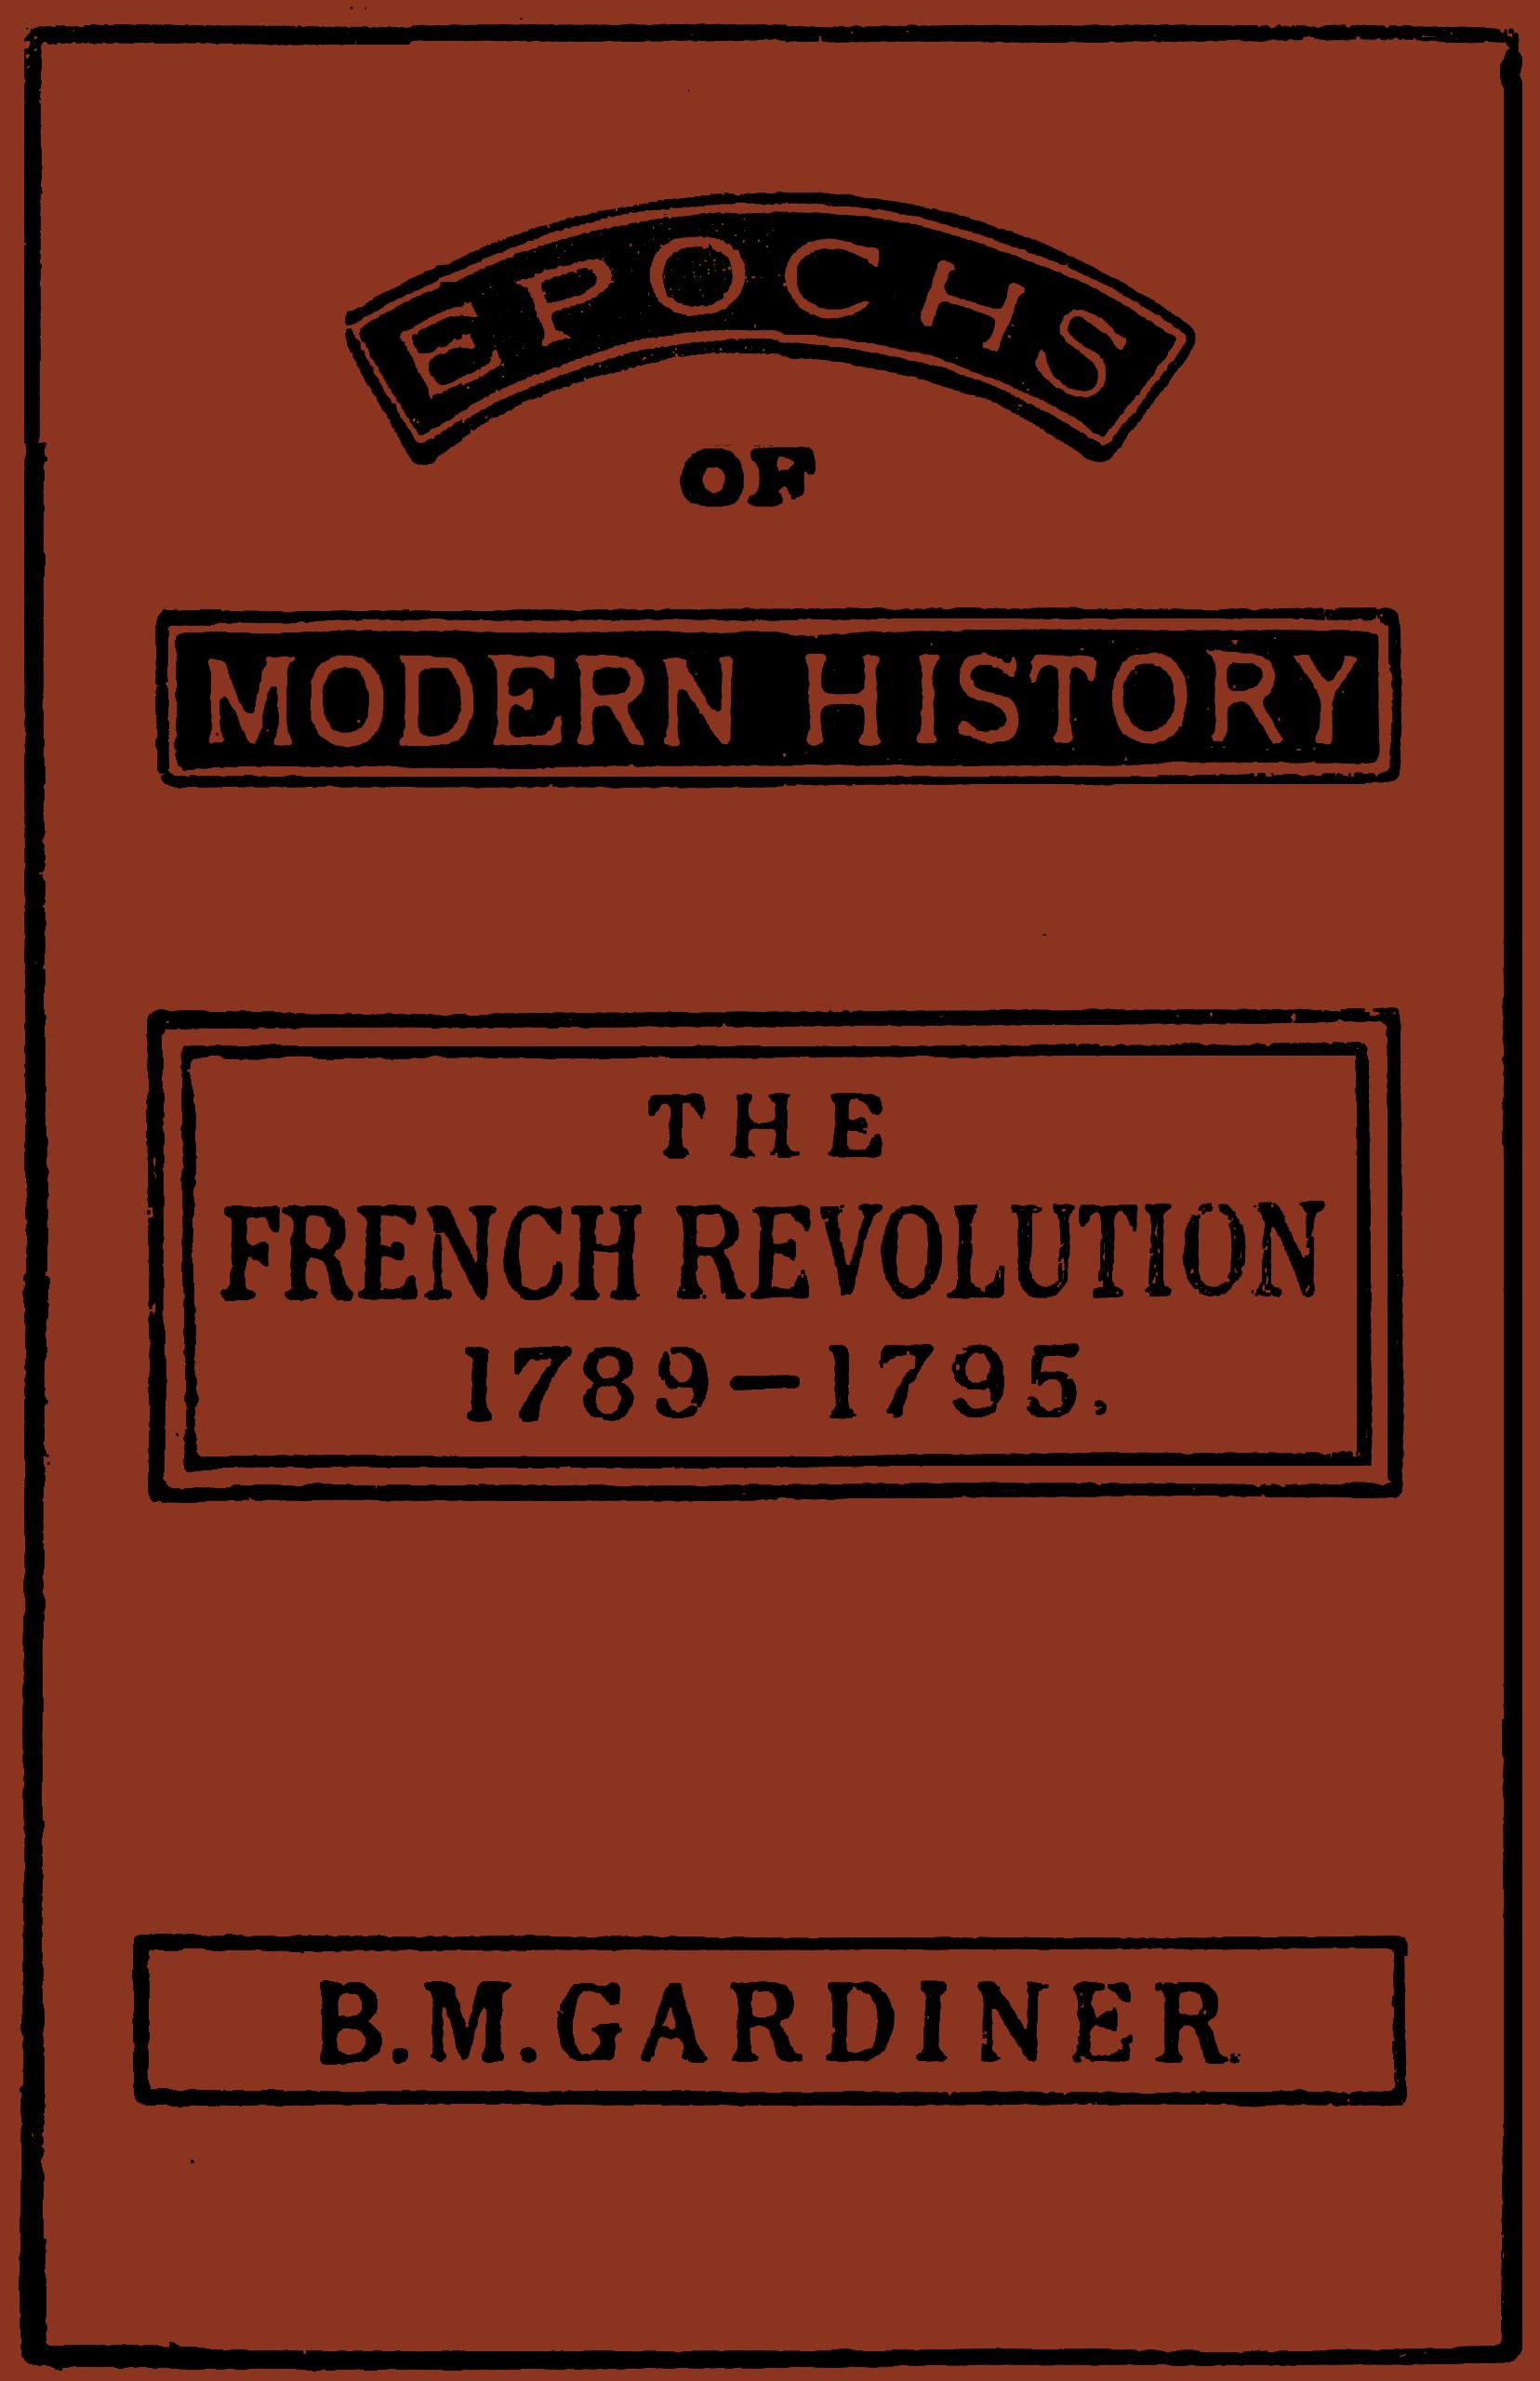 Marie Antoinette - Women in the French Revolution: A Resource Guide -  Research Guides at Library of Congress